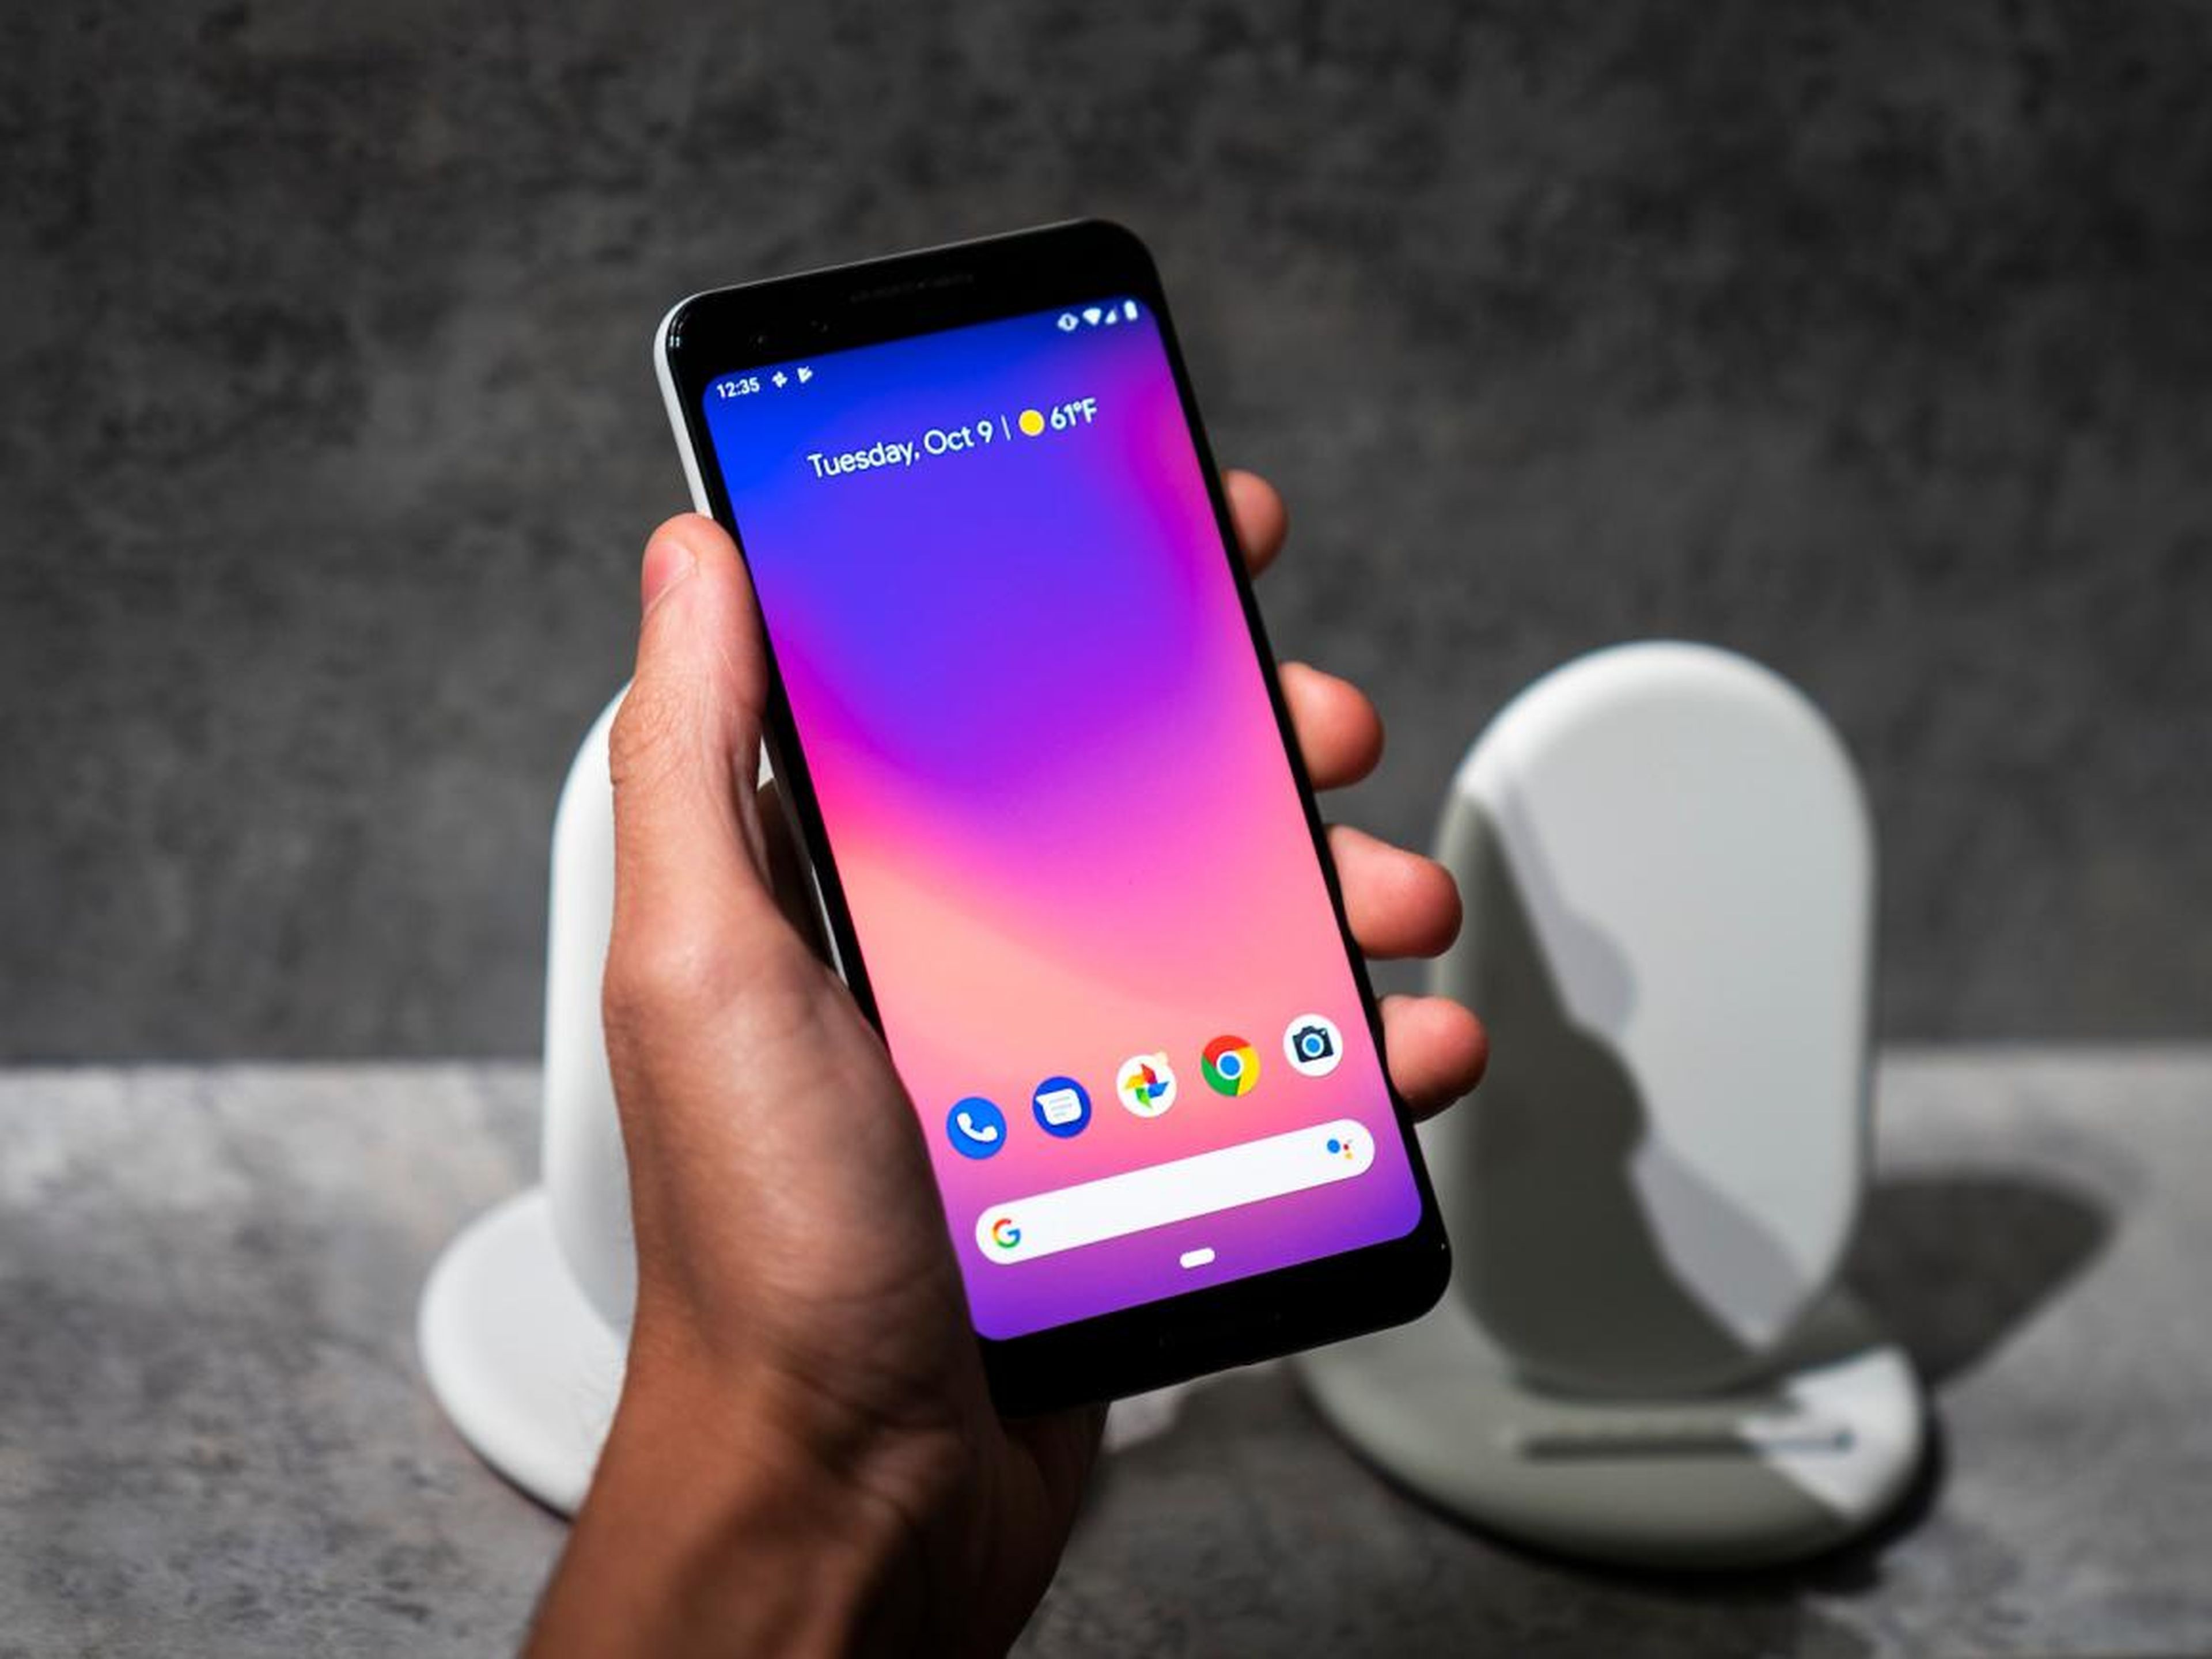 Here's how Google's new $800 Pixel 3 compares to the $750 iPhone XR